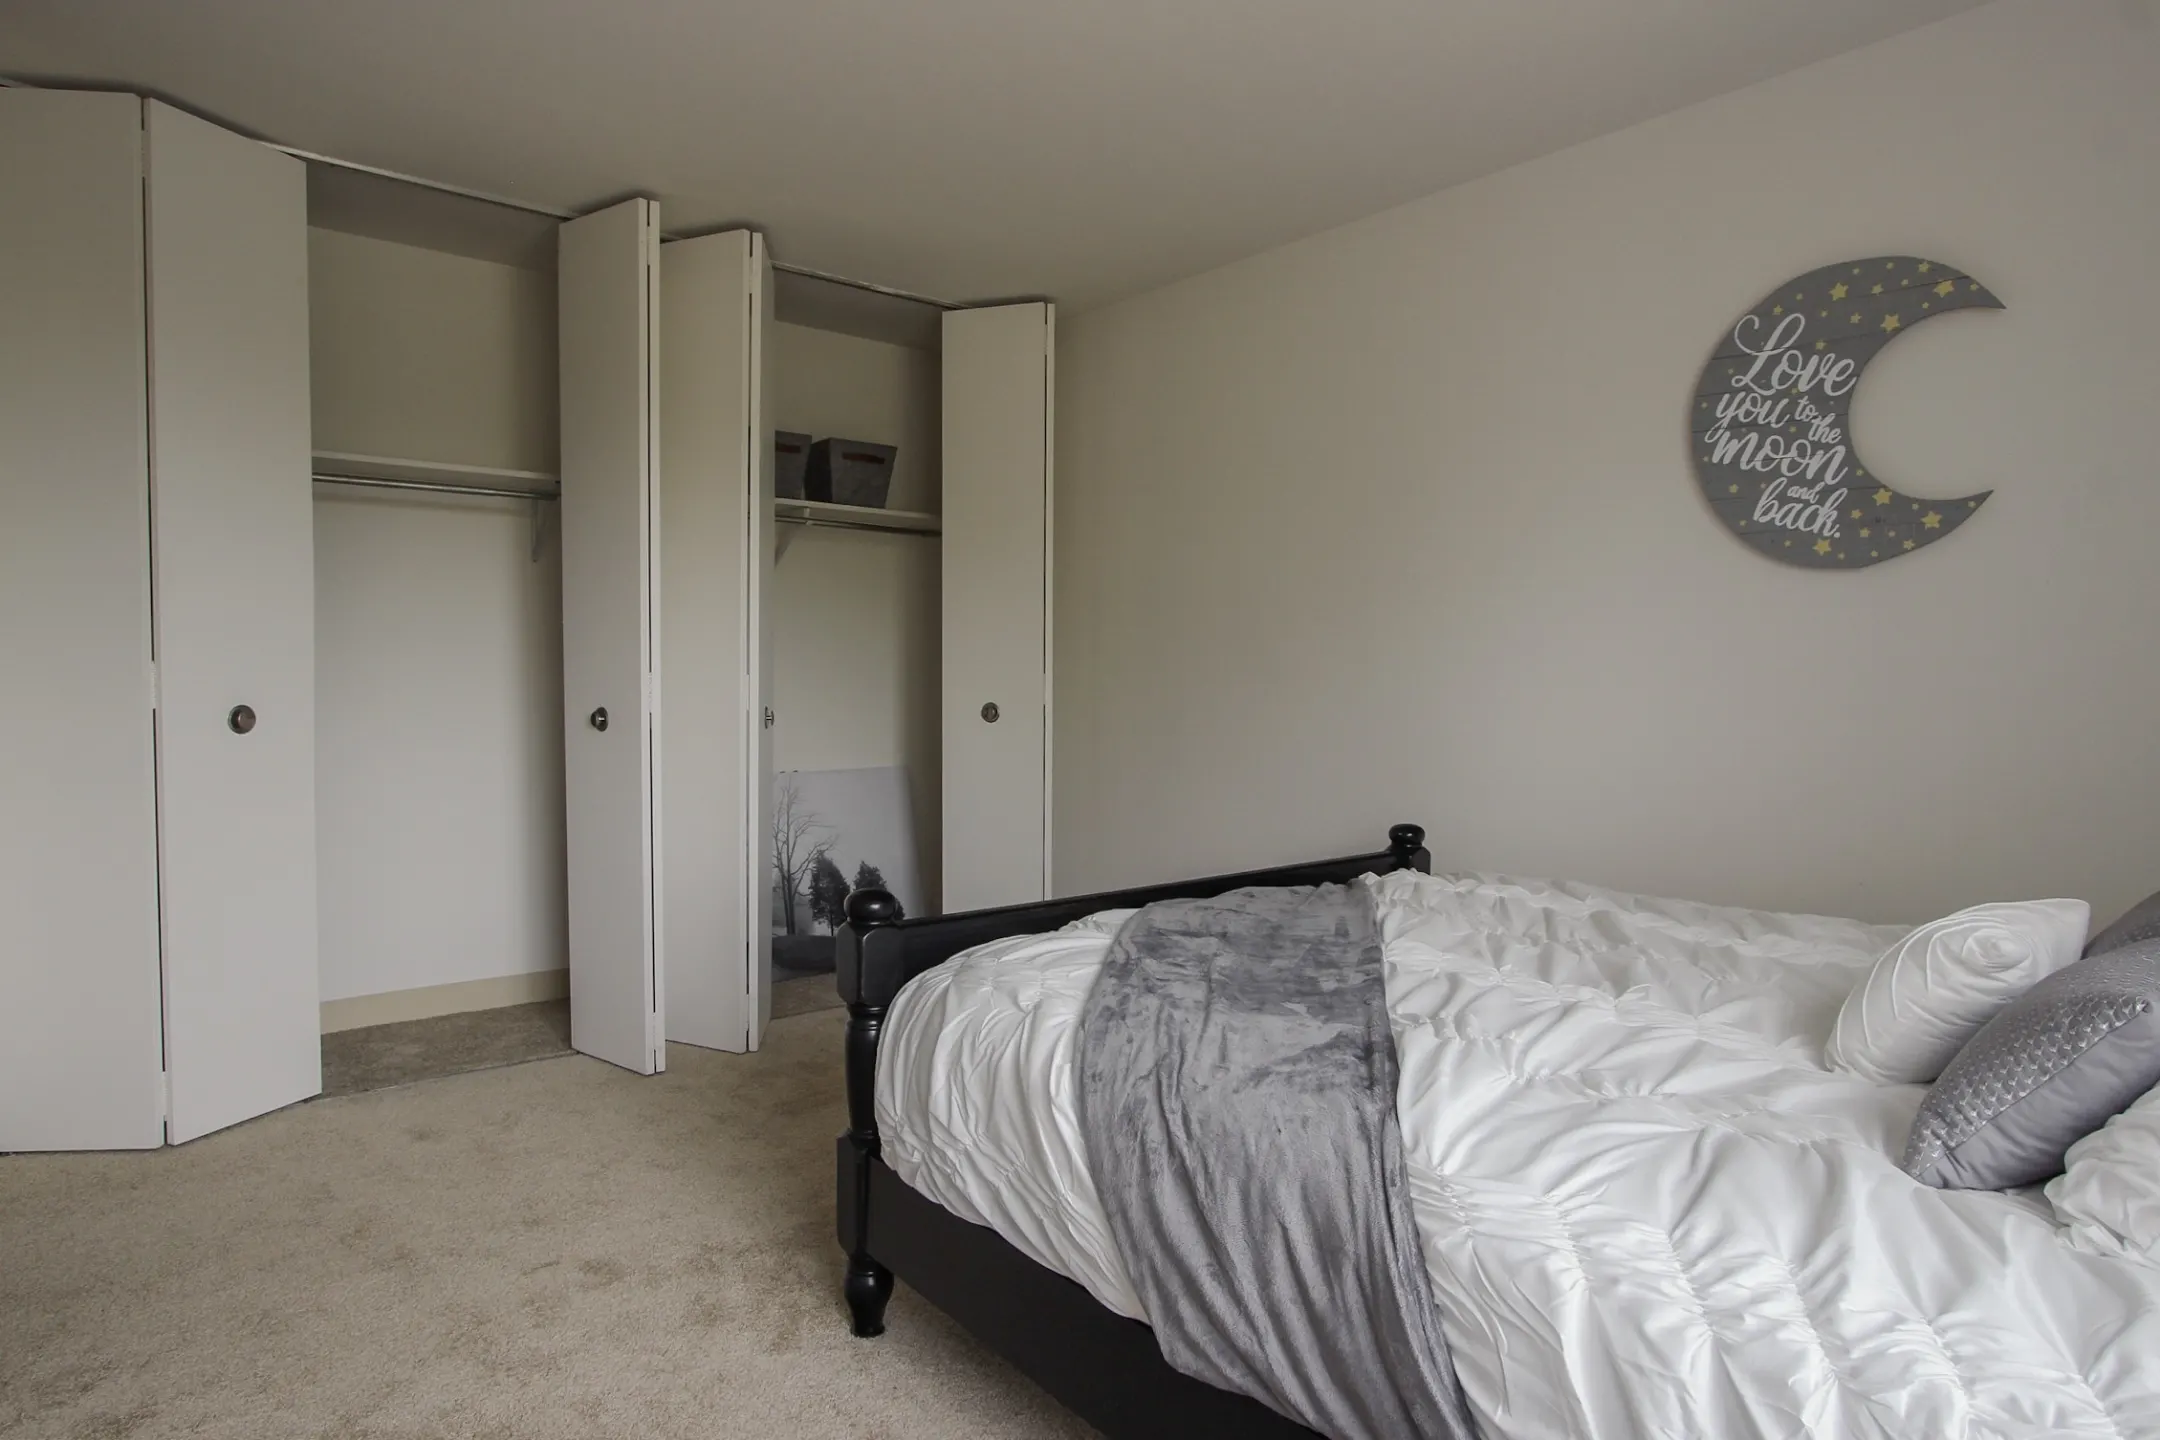 Bedroom - Greenbrook Apartments - Greenfield, WI